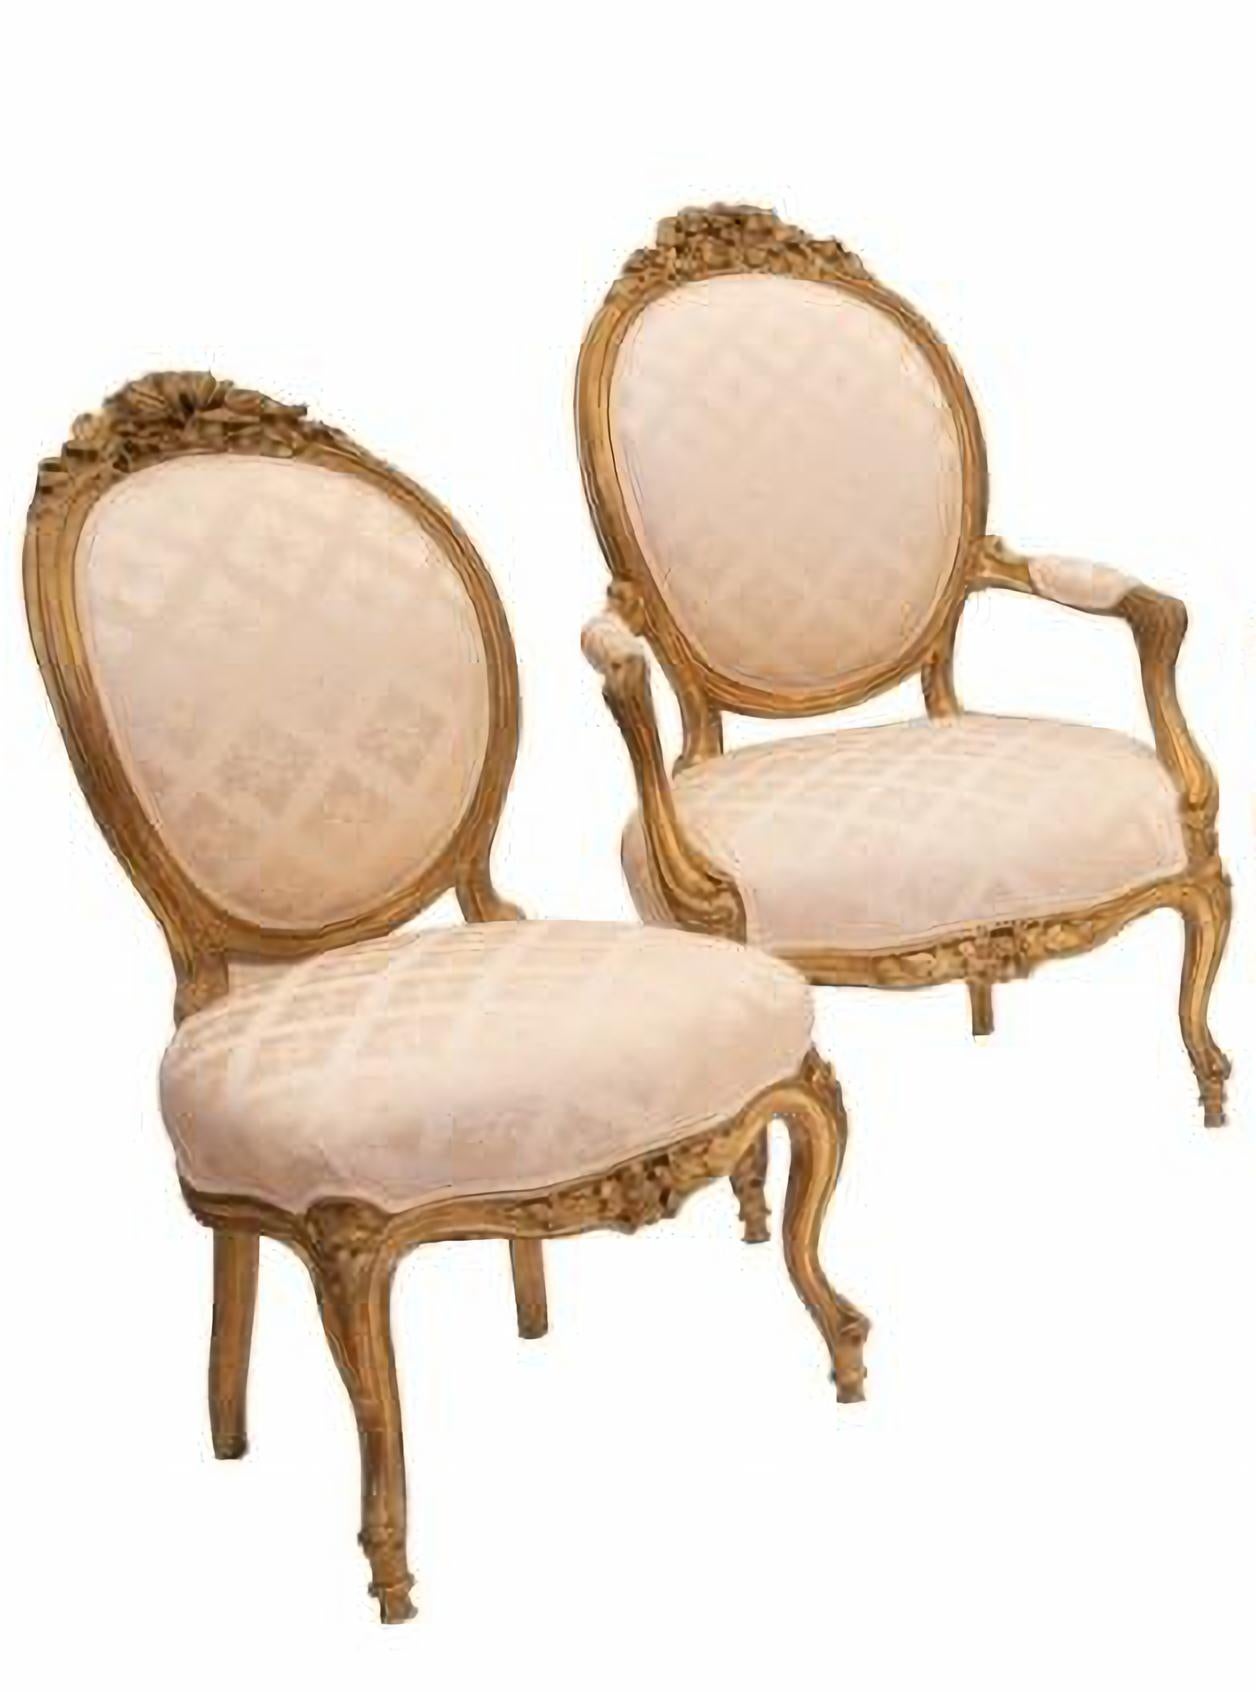 
19th Century Italian Living Room
in gilded wood consisting of a sofa, two armchairs and two chairs
Golden wood structure.
Seat and backrest in ivory fabric
